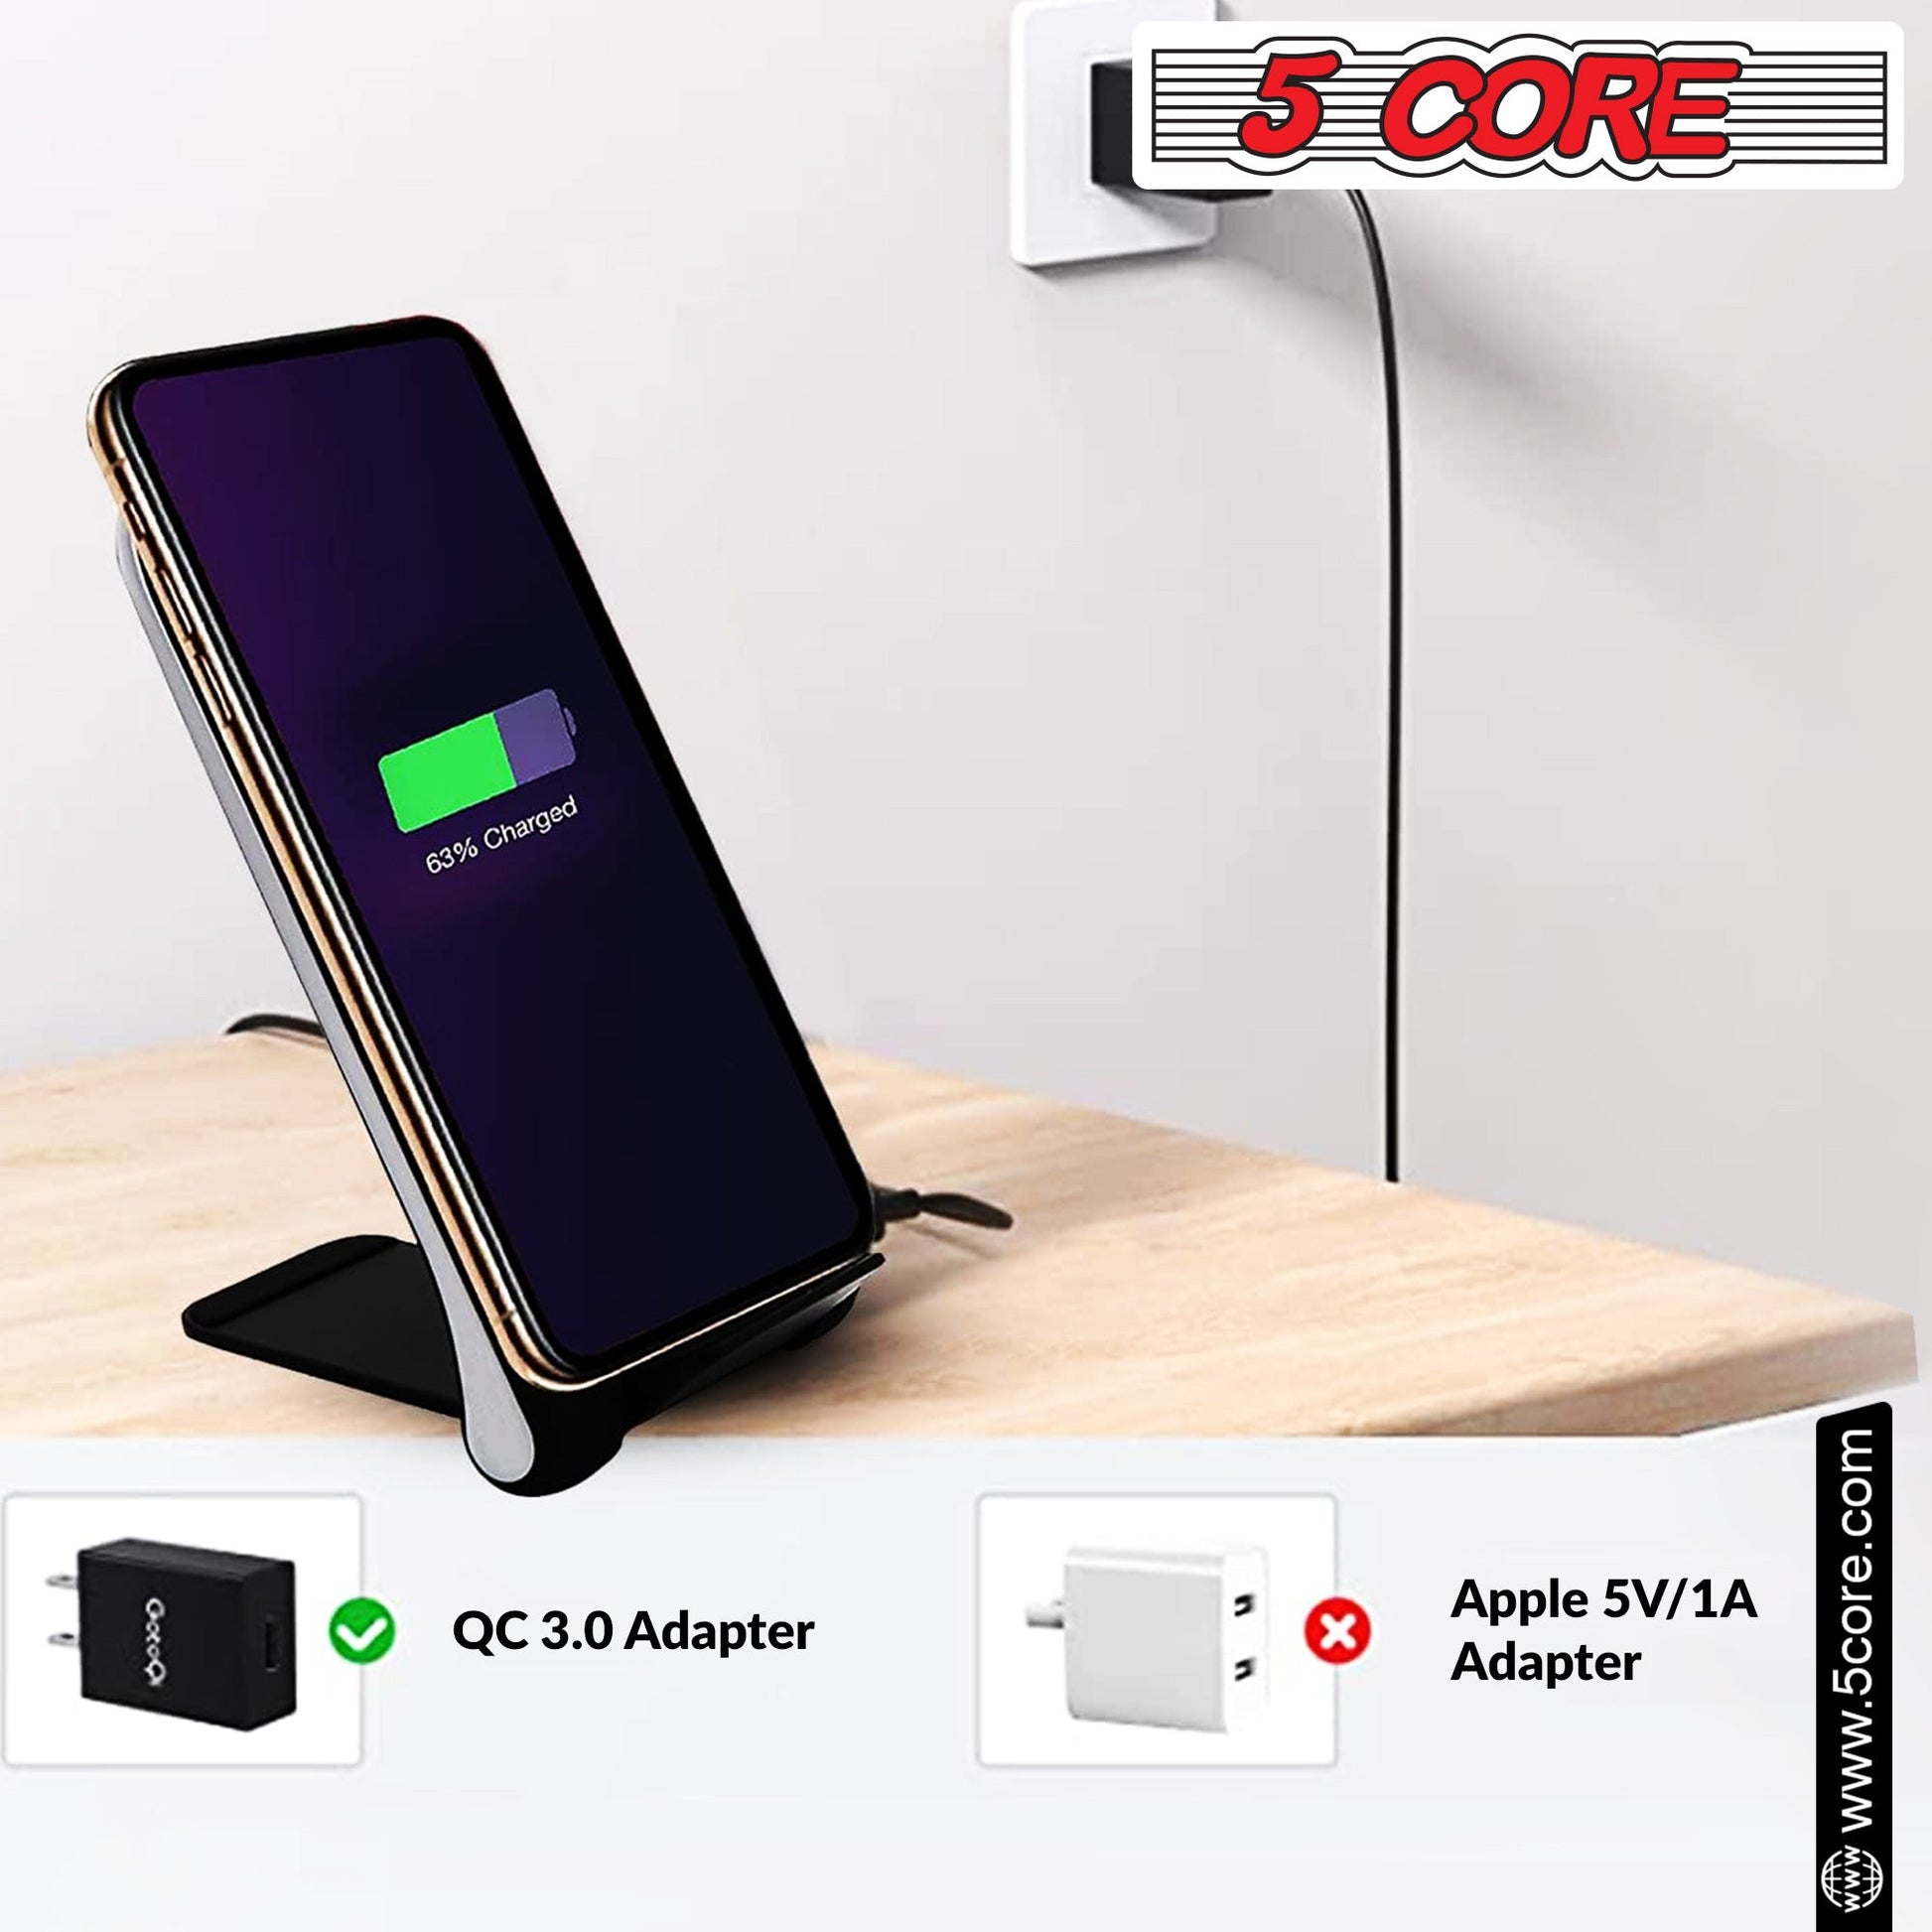 5 Core Magsafe Charger 2 Pieces Black and White Portable Wireless Charging Station Fast Phone Charger Stand w Sleep Friendly LED 2 Charging Coil Samsumg iPhone Wireless Fast Charging Stand - CDKW03-6